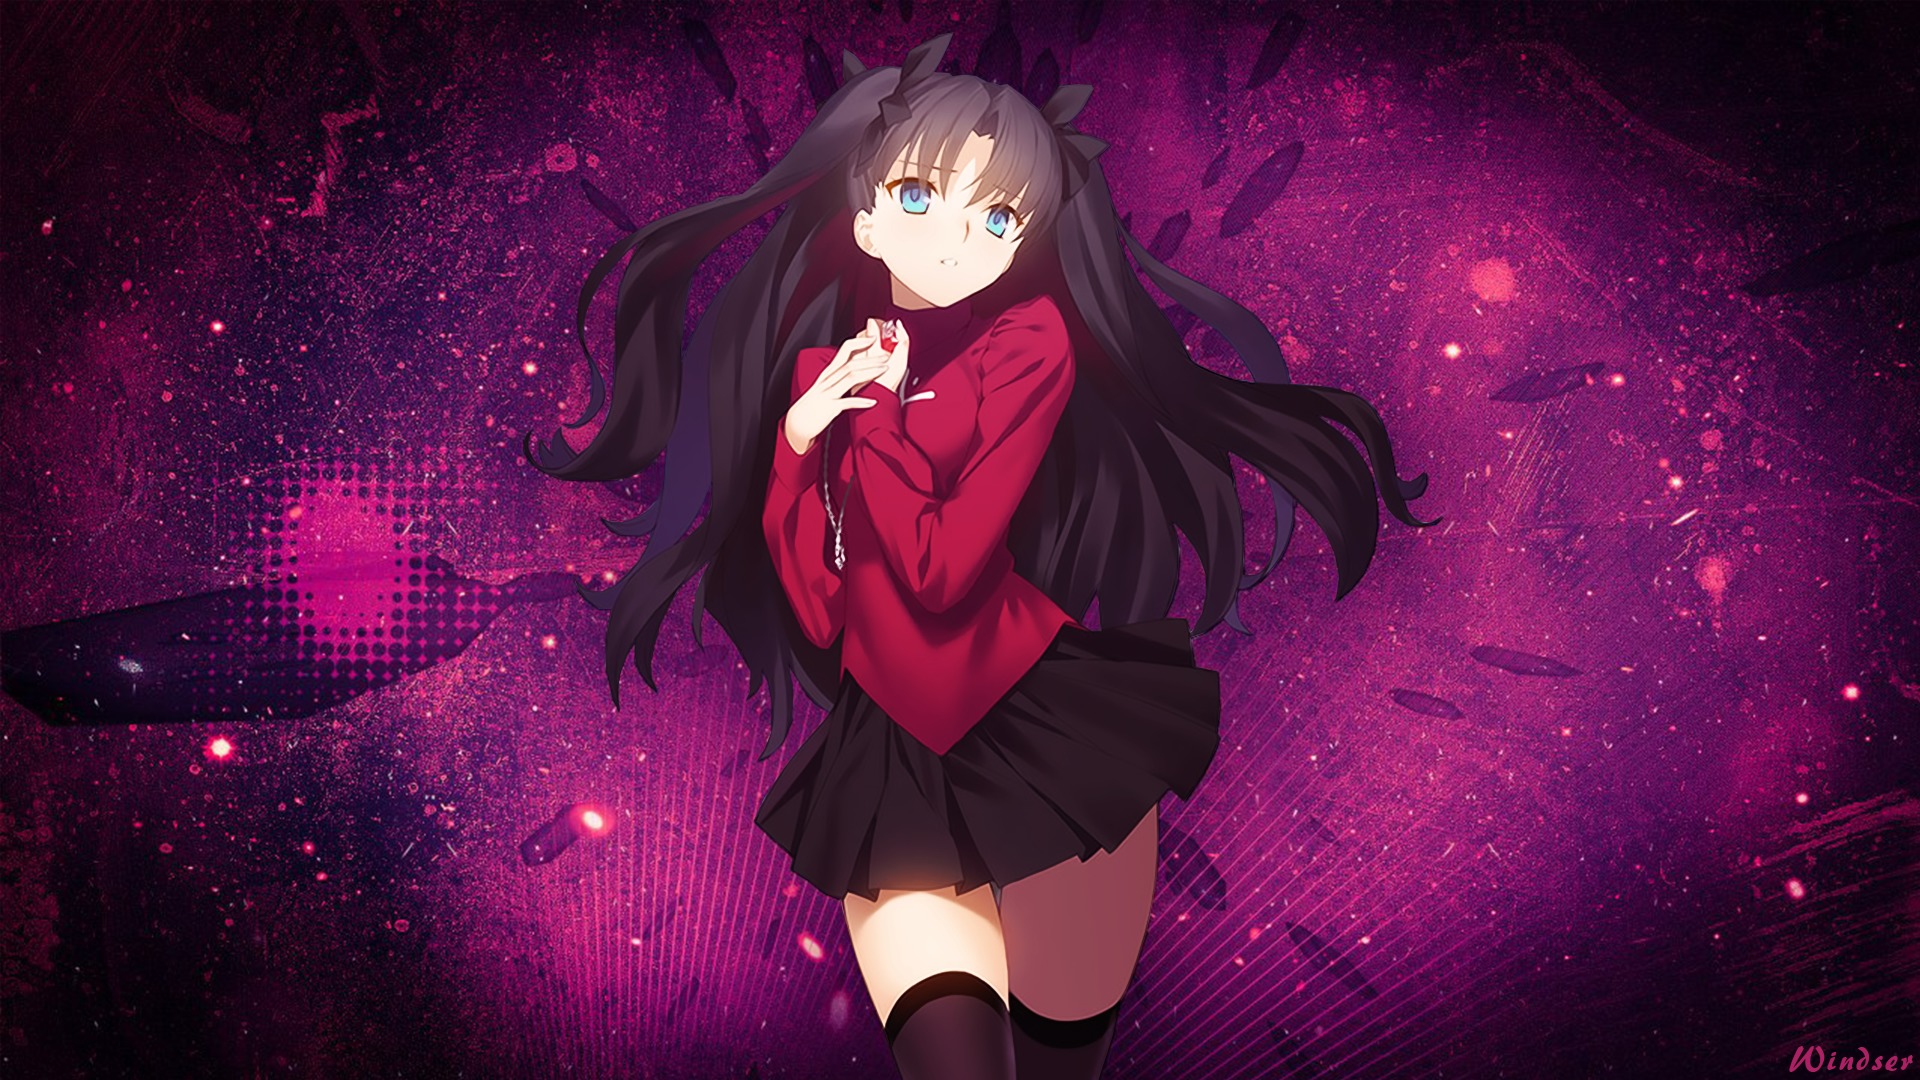 1440x Rin Tohsaka Fate Stay Night Unlimited Blade Works 1440x Resolution Wallpaper Hd Anime 4k Wallpapers Images Photos And Background Wallpapers Den